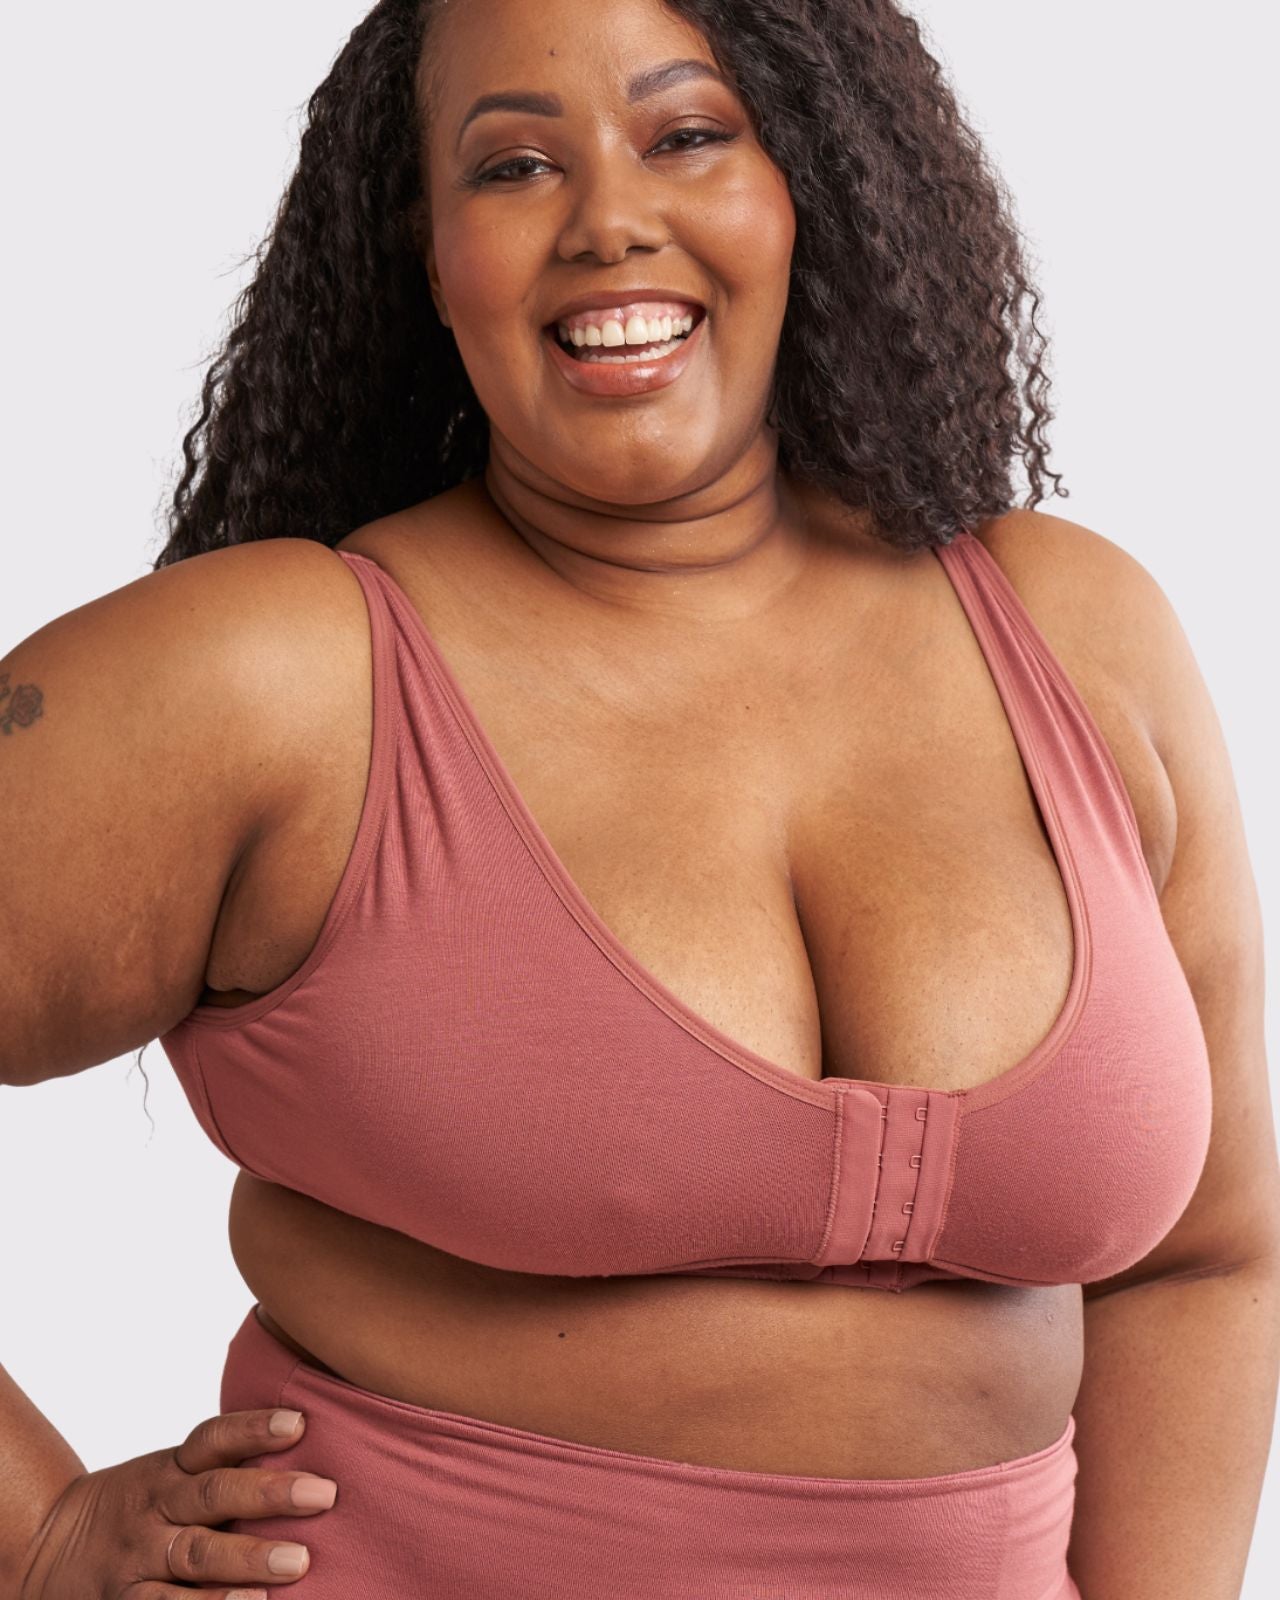 Rora Pocketed Front Closure Bra Bra in Dusty Rose By AnaOno - XS-3X